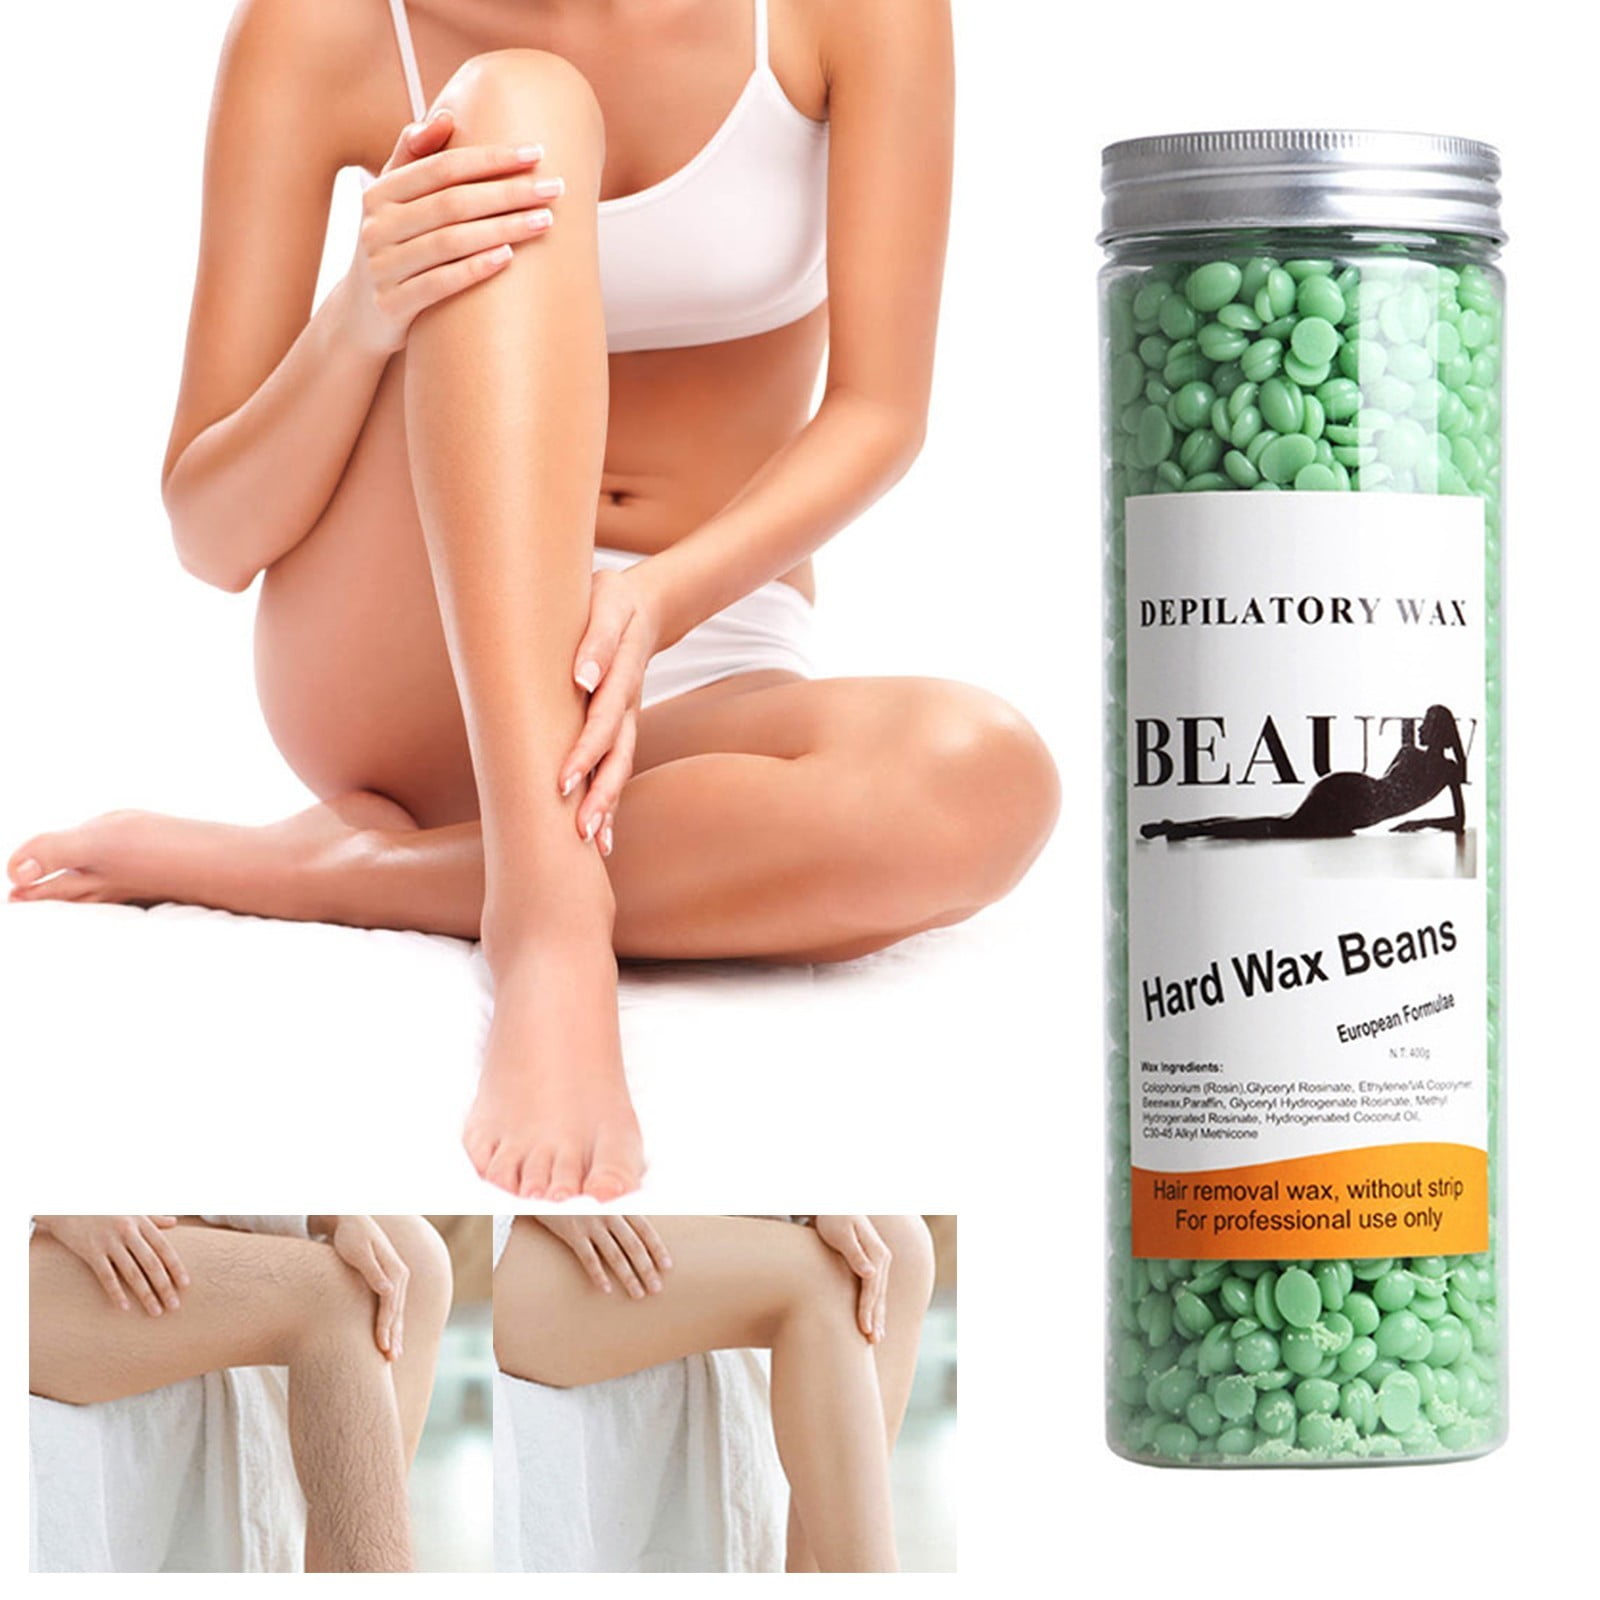 Happy Waxing Beads 400g Refill